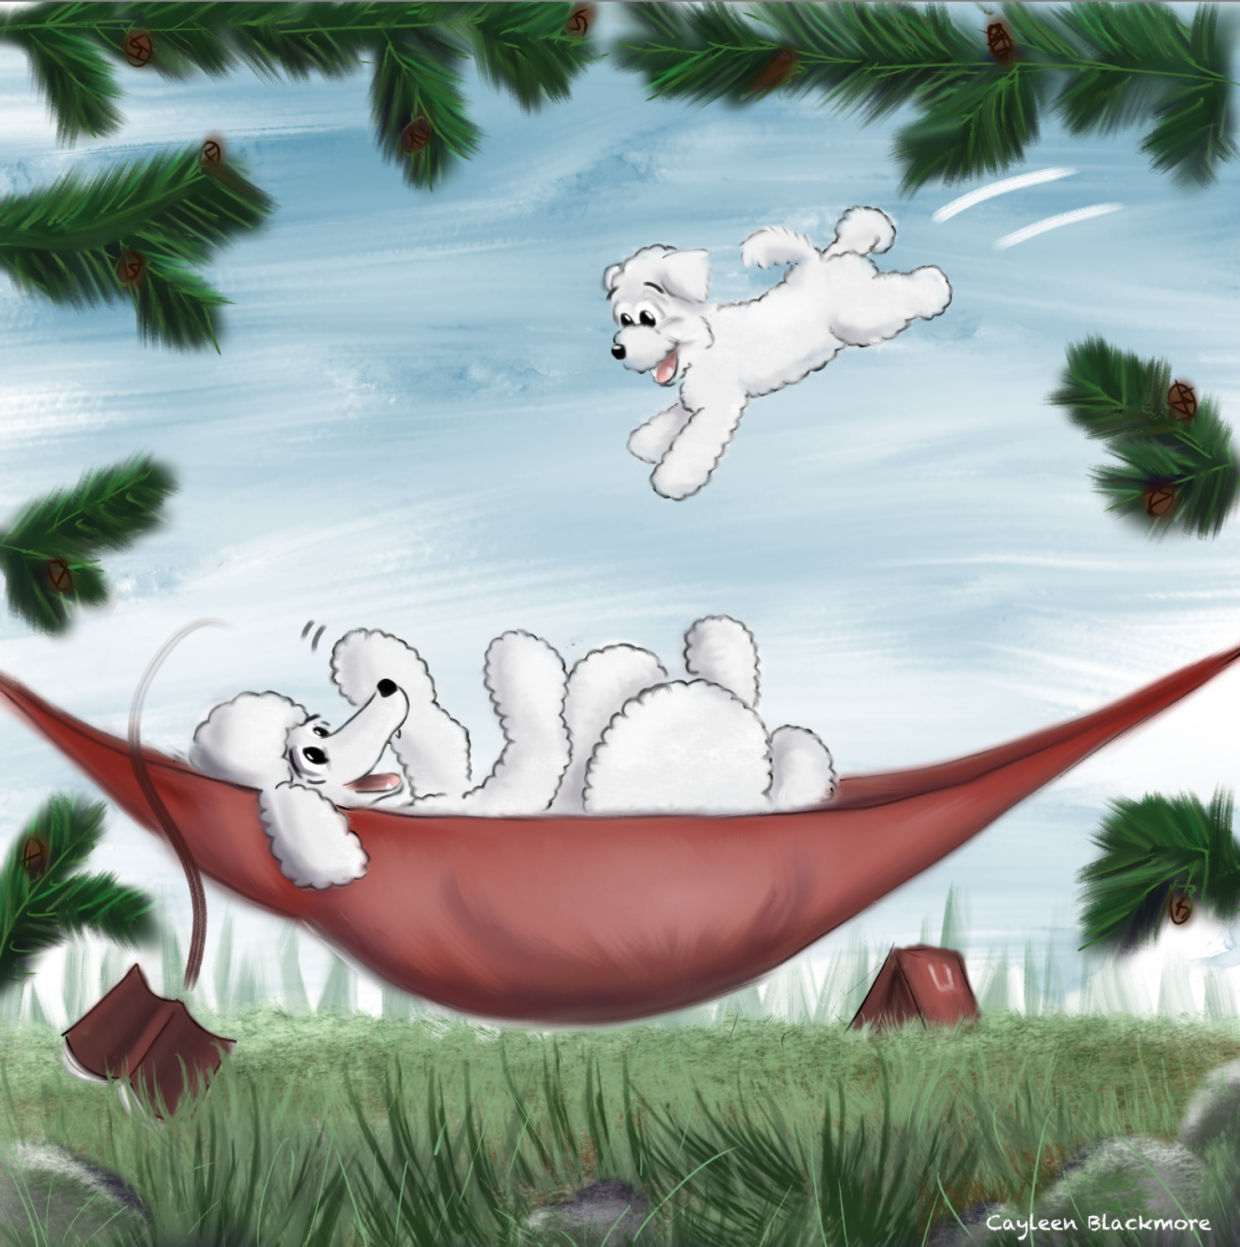 Poodle puppy leaping on parent poodle reading in a hammock